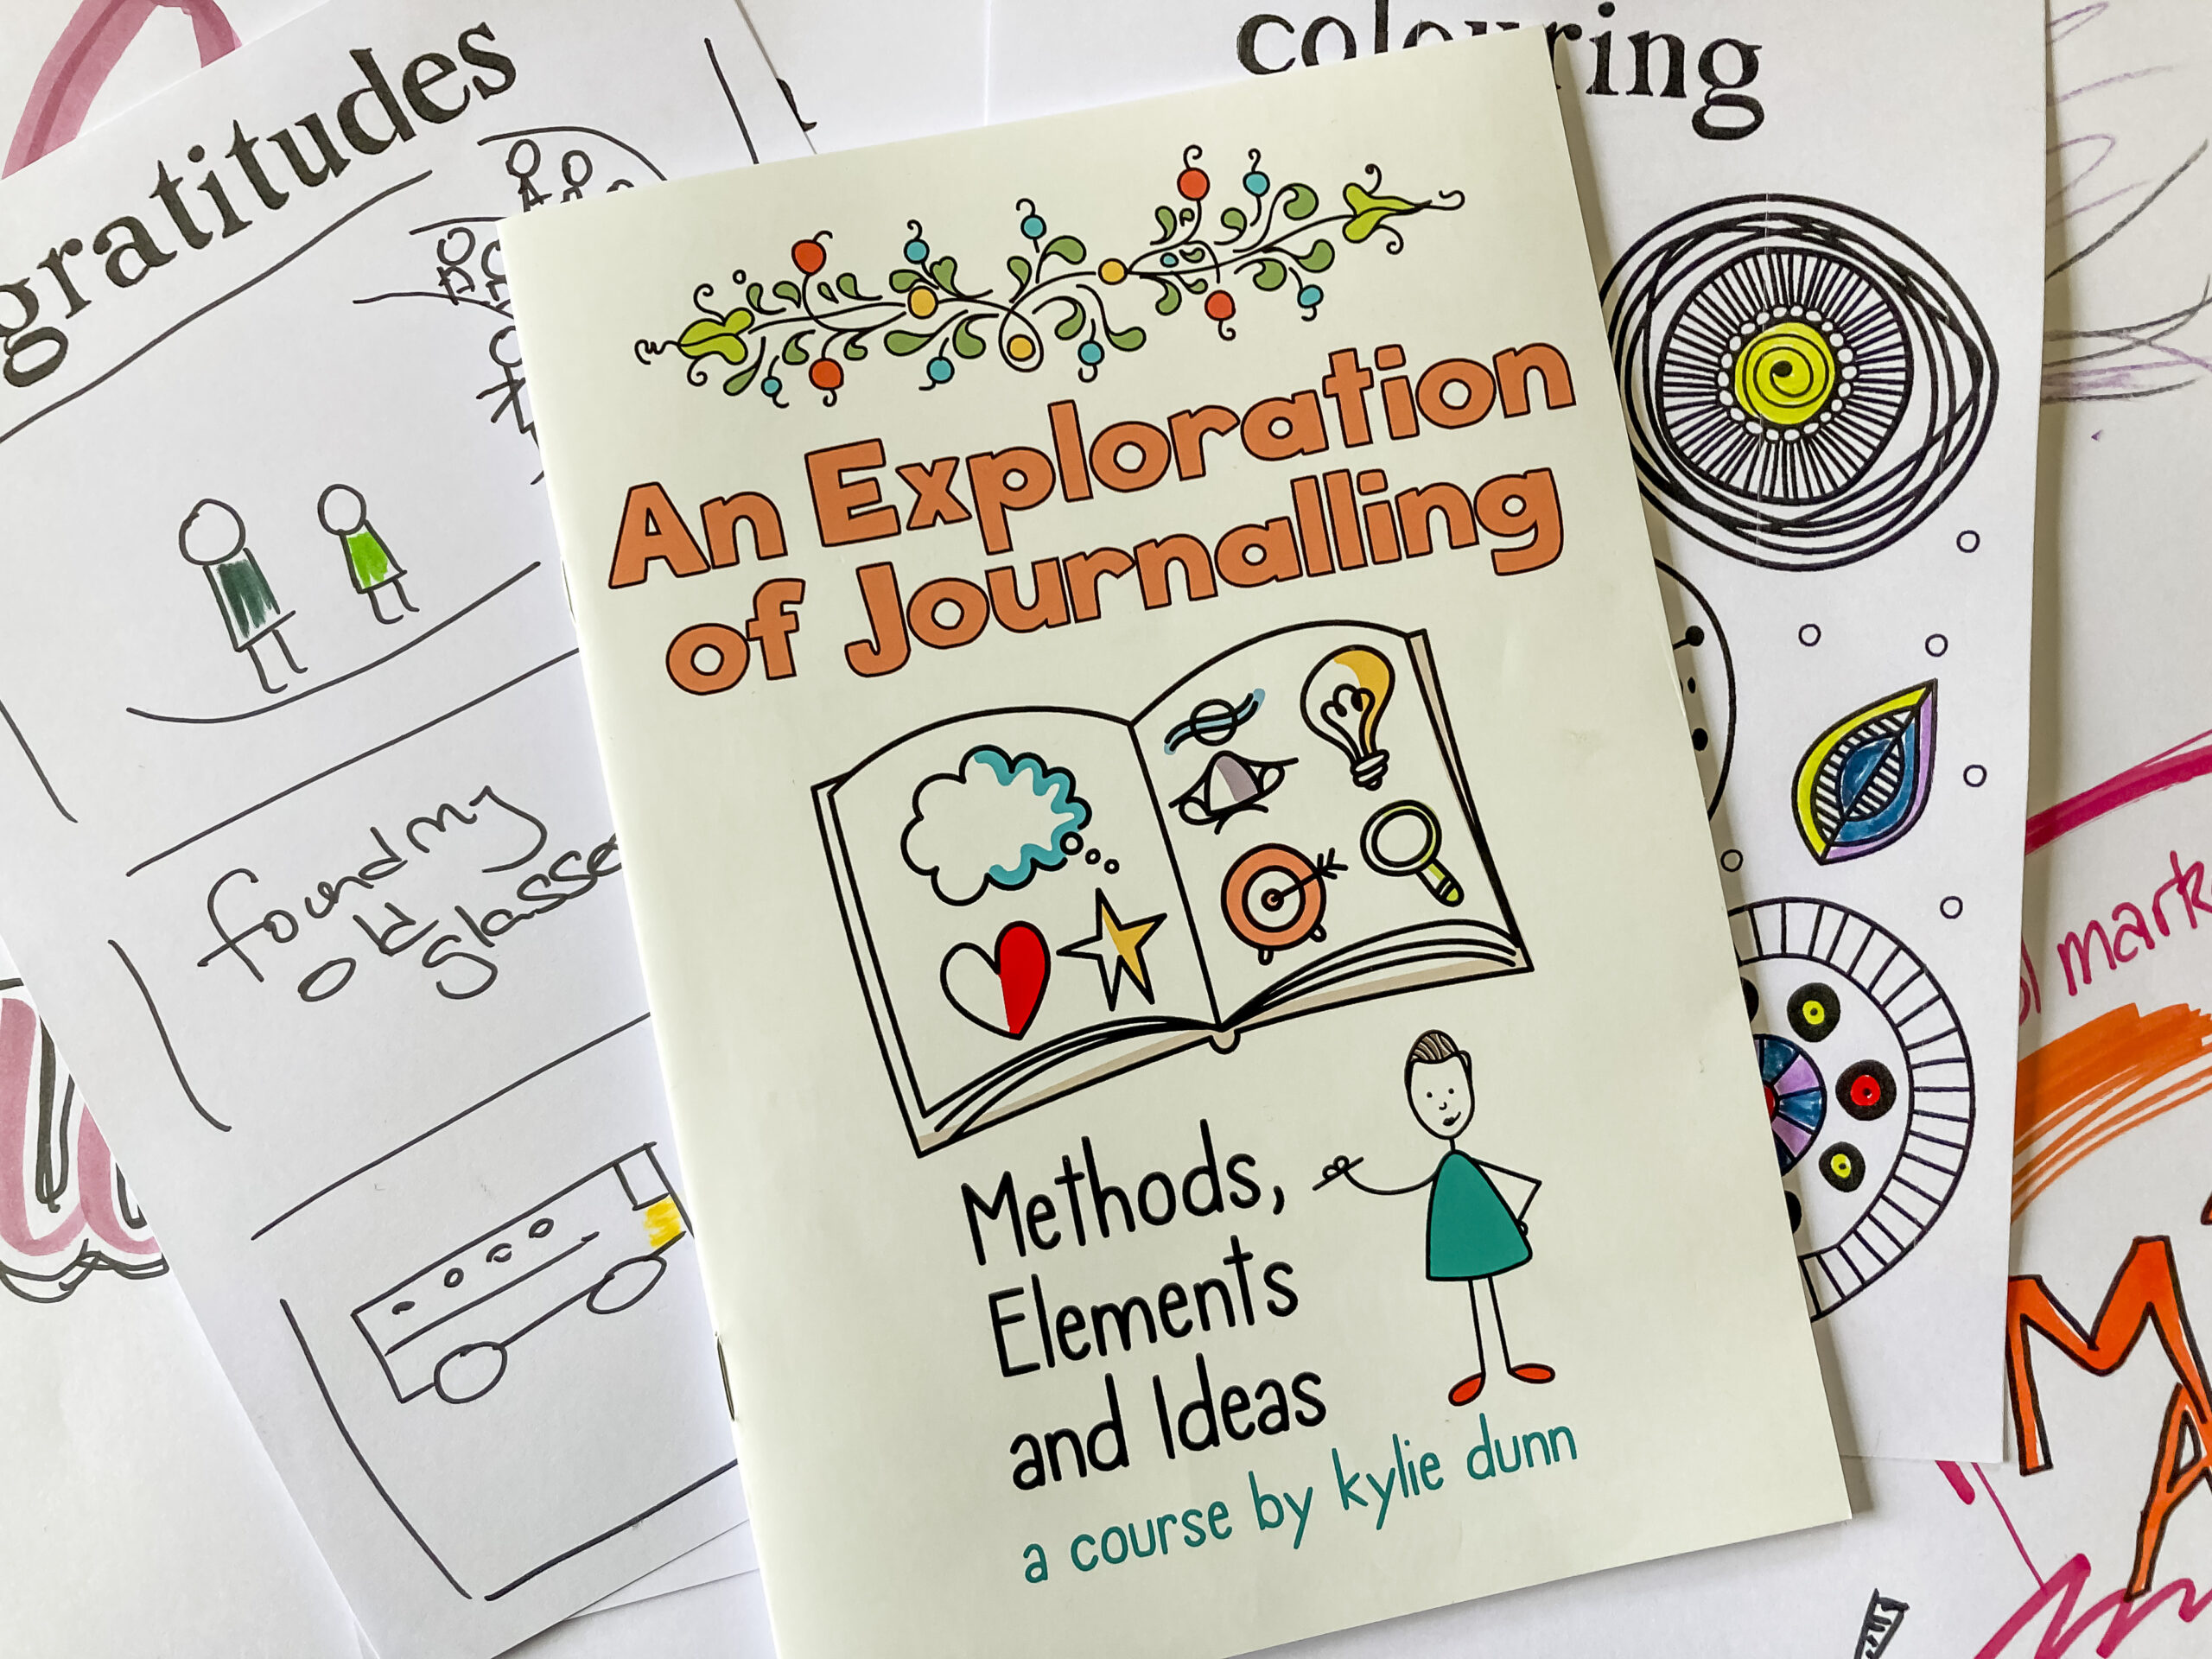 A small book called An Exploration of Journalling - Methods, Elements and Ideas